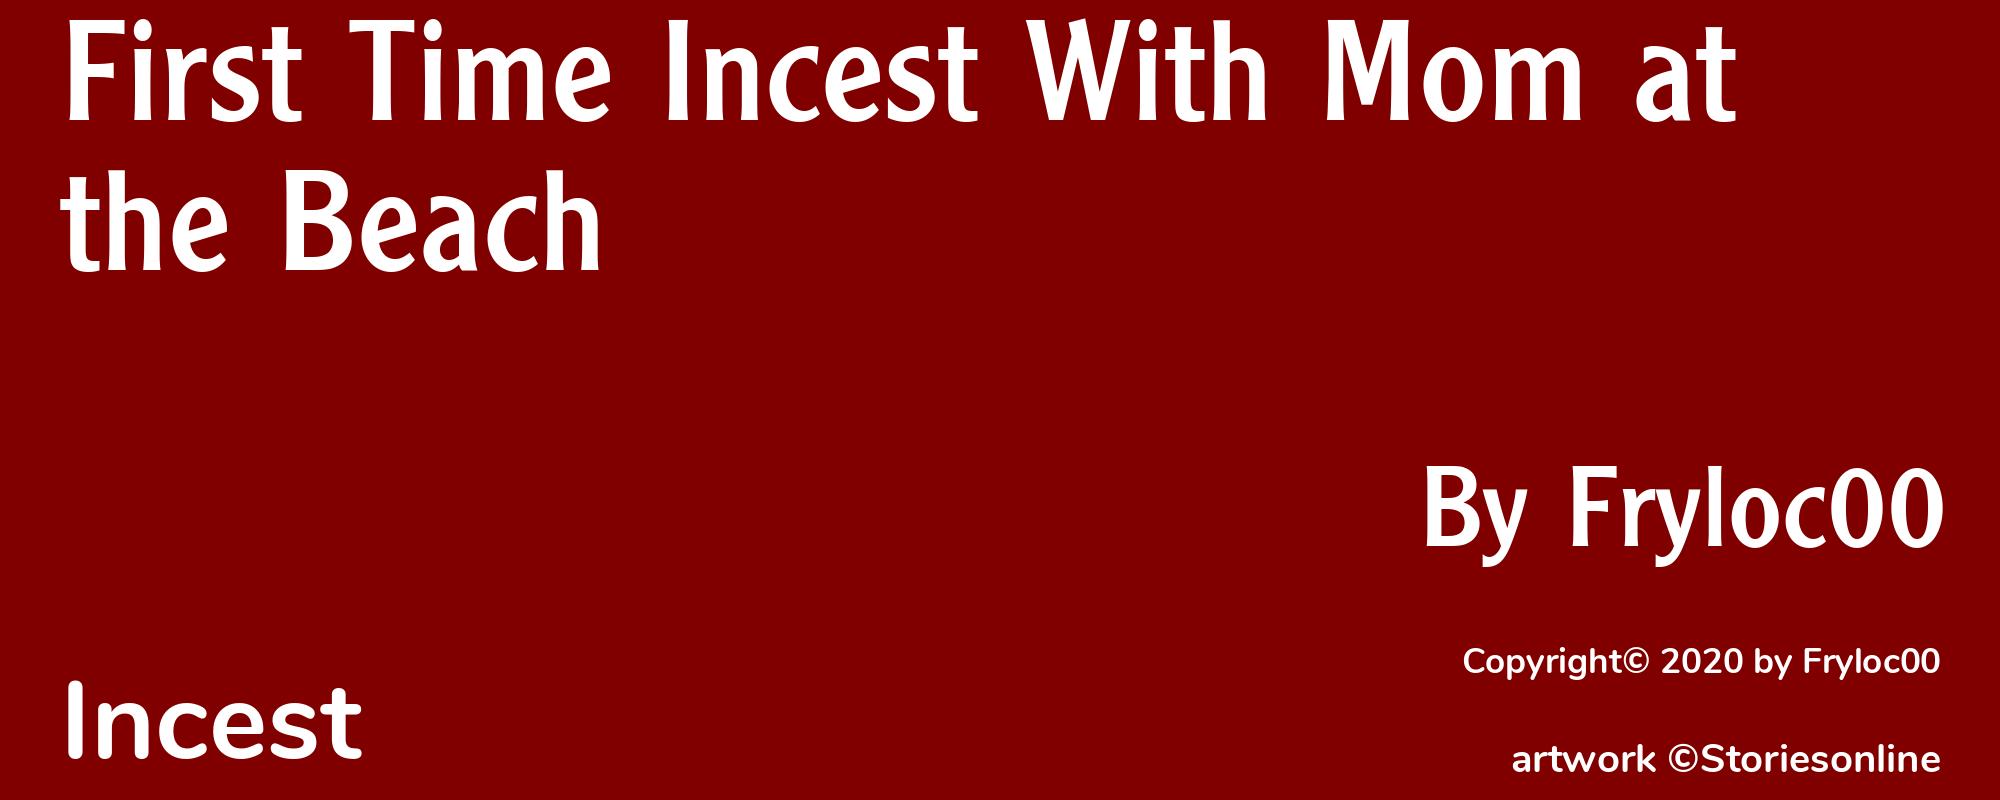 First Time Incest With Mom at the Beach - Cover